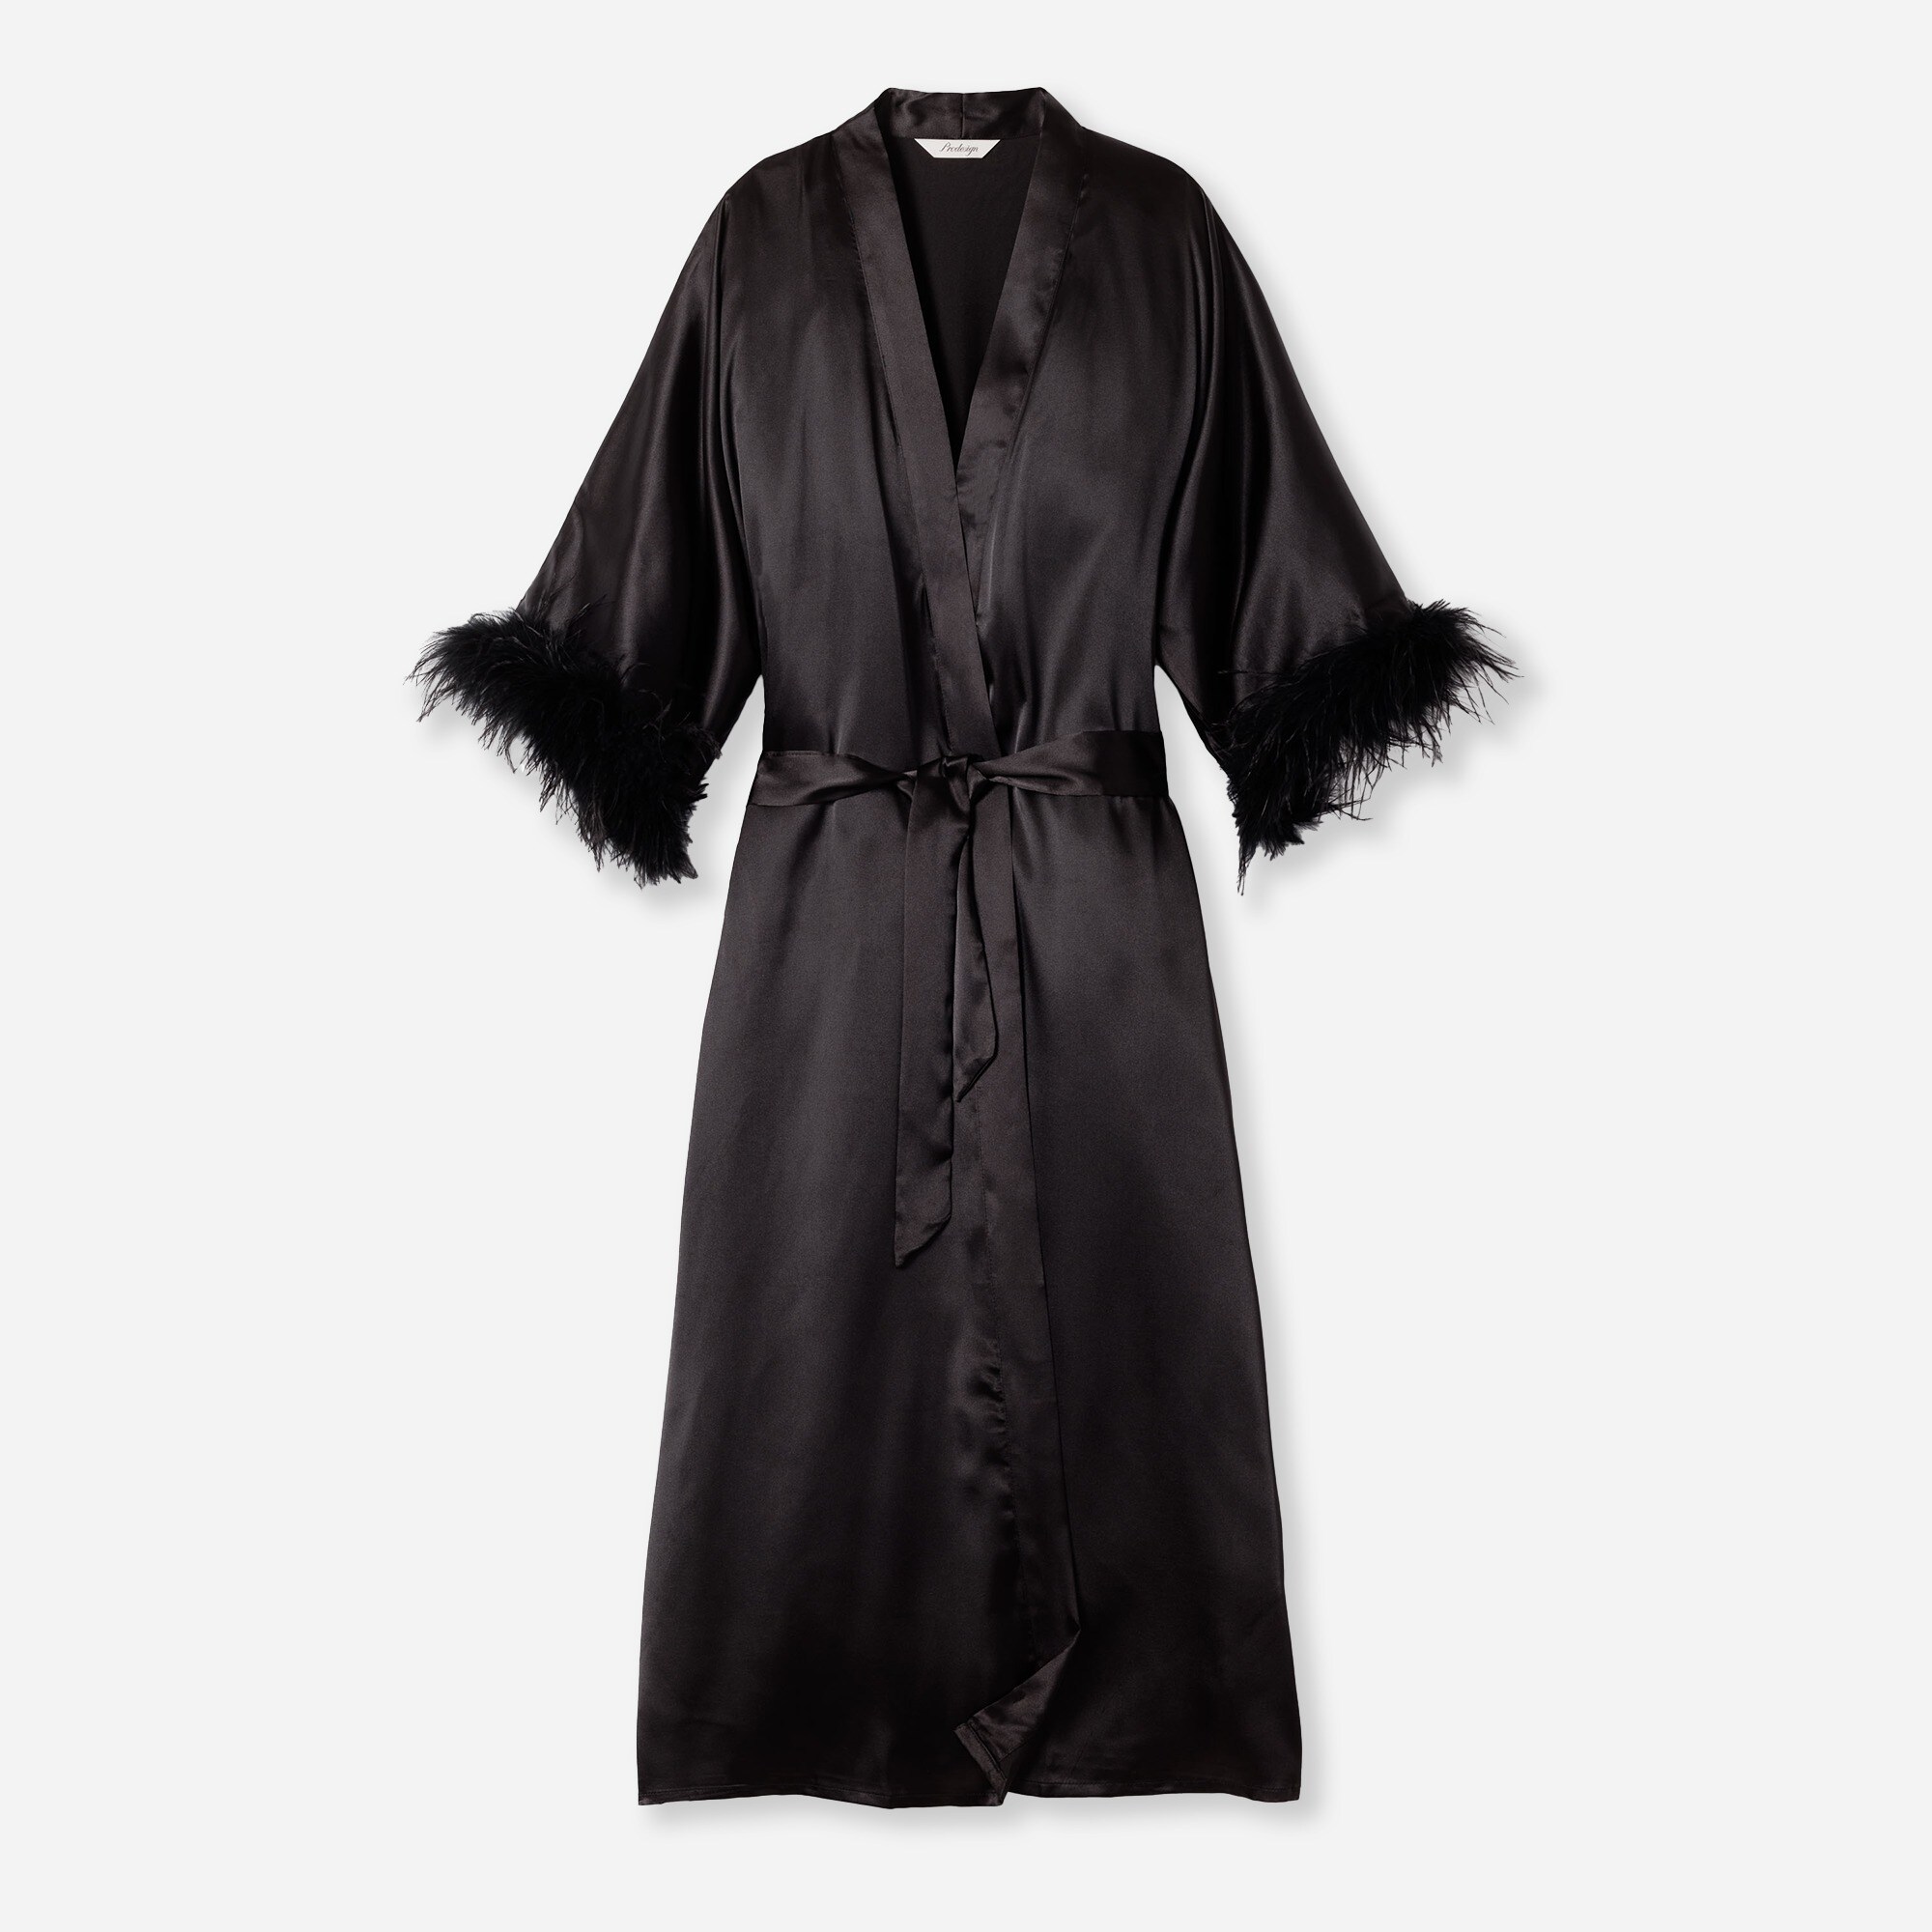  Petite Plume™ women's silk robe with feathers